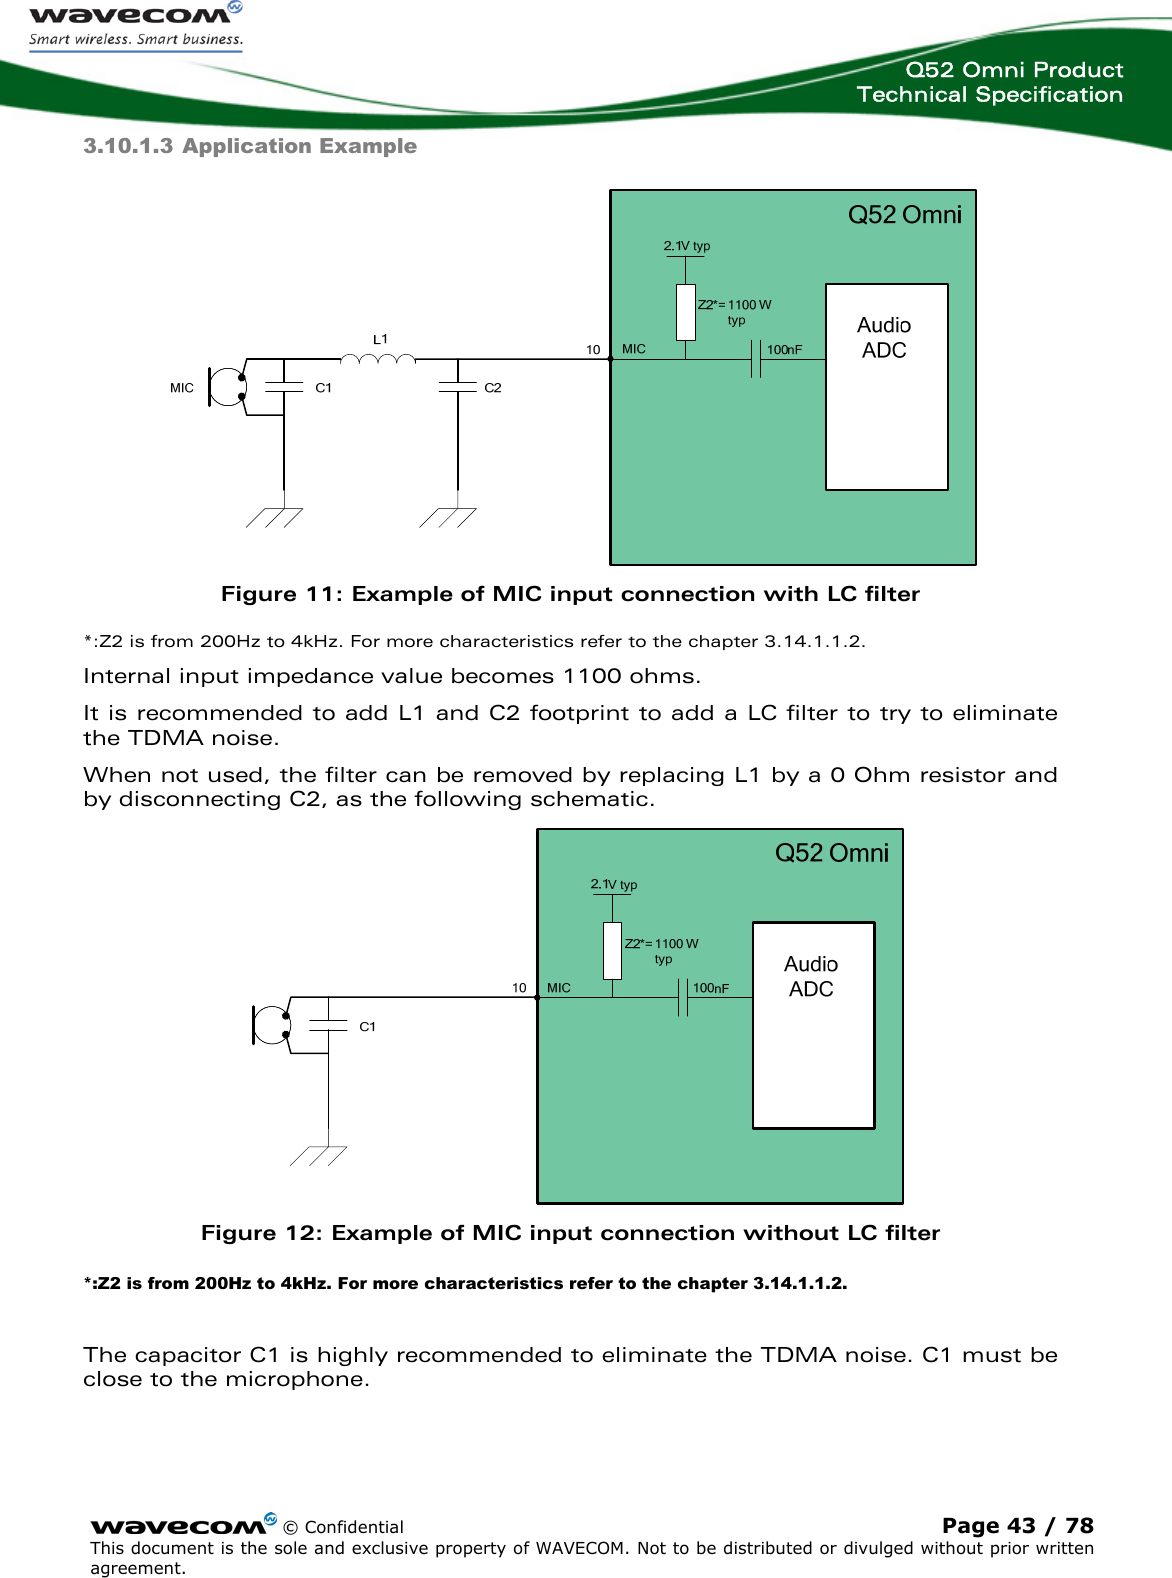  Q52 Omni Product Technical Specification    © Confidential Page 43 / 78 This document is the sole and exclusive property of WAVECOM. Not to be distributed or divulged without prior written agreement.  3.10.1.3 Application Example  Figure 11: Example of MIC input connection with LC filter *:Z2 is from 200Hz to 4kHz. For more characteristics refer to the chapter 3.14.1.1.2. Internal input impedance value becomes 1100 ohms. It is recommended to add L1 and C2 footprint to add a LC filter to try to eliminate the TDMA noise. When not used, the filter can be removed by replacing L1 by a 0 Ohm resistor and by disconnecting C2, as the following schematic.  Figure 12: Example of MIC input connection without LC filter *:Z2 is from 200Hz to 4kHz. For more characteristics refer to the chapter 3.14.1.1.2.  The capacitor C1 is highly recommended to eliminate the TDMA noise. C1 must be close to the microphone. 